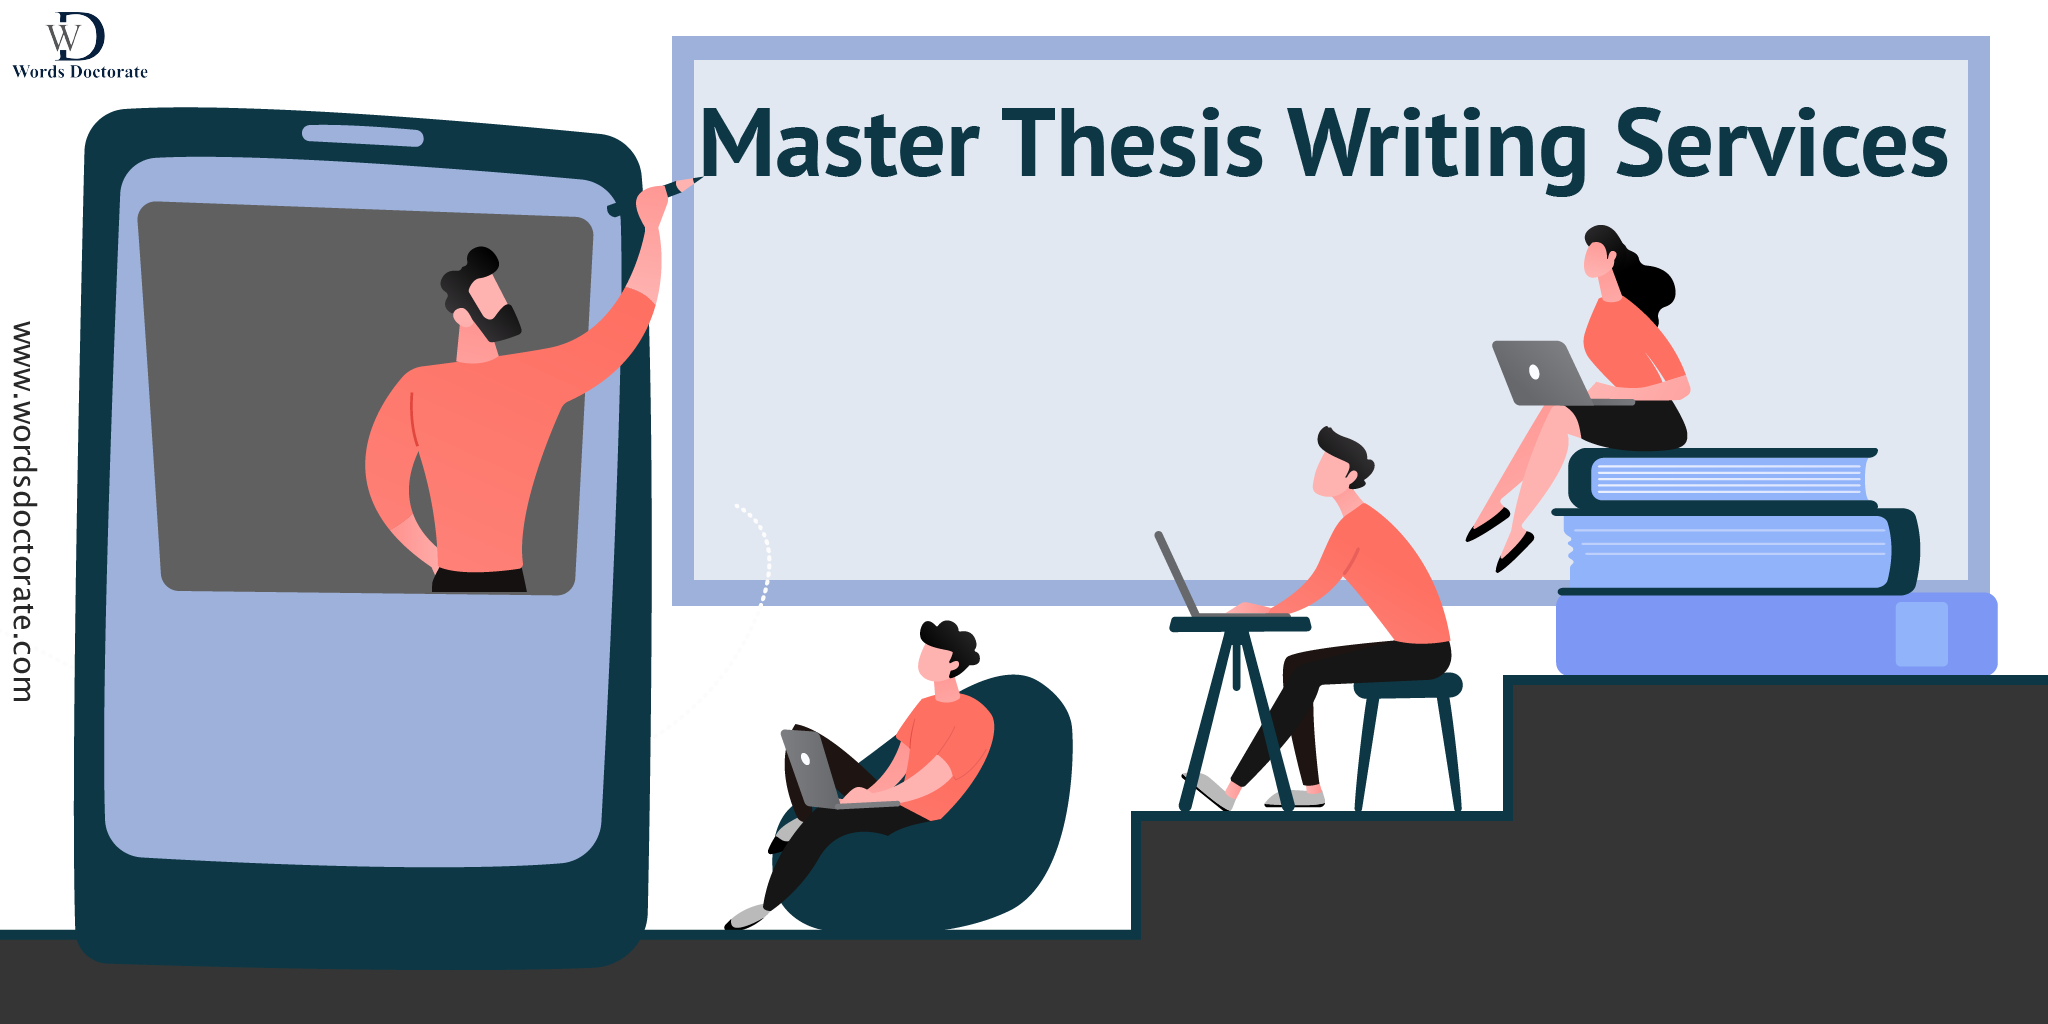 Master Thesis Writing Services